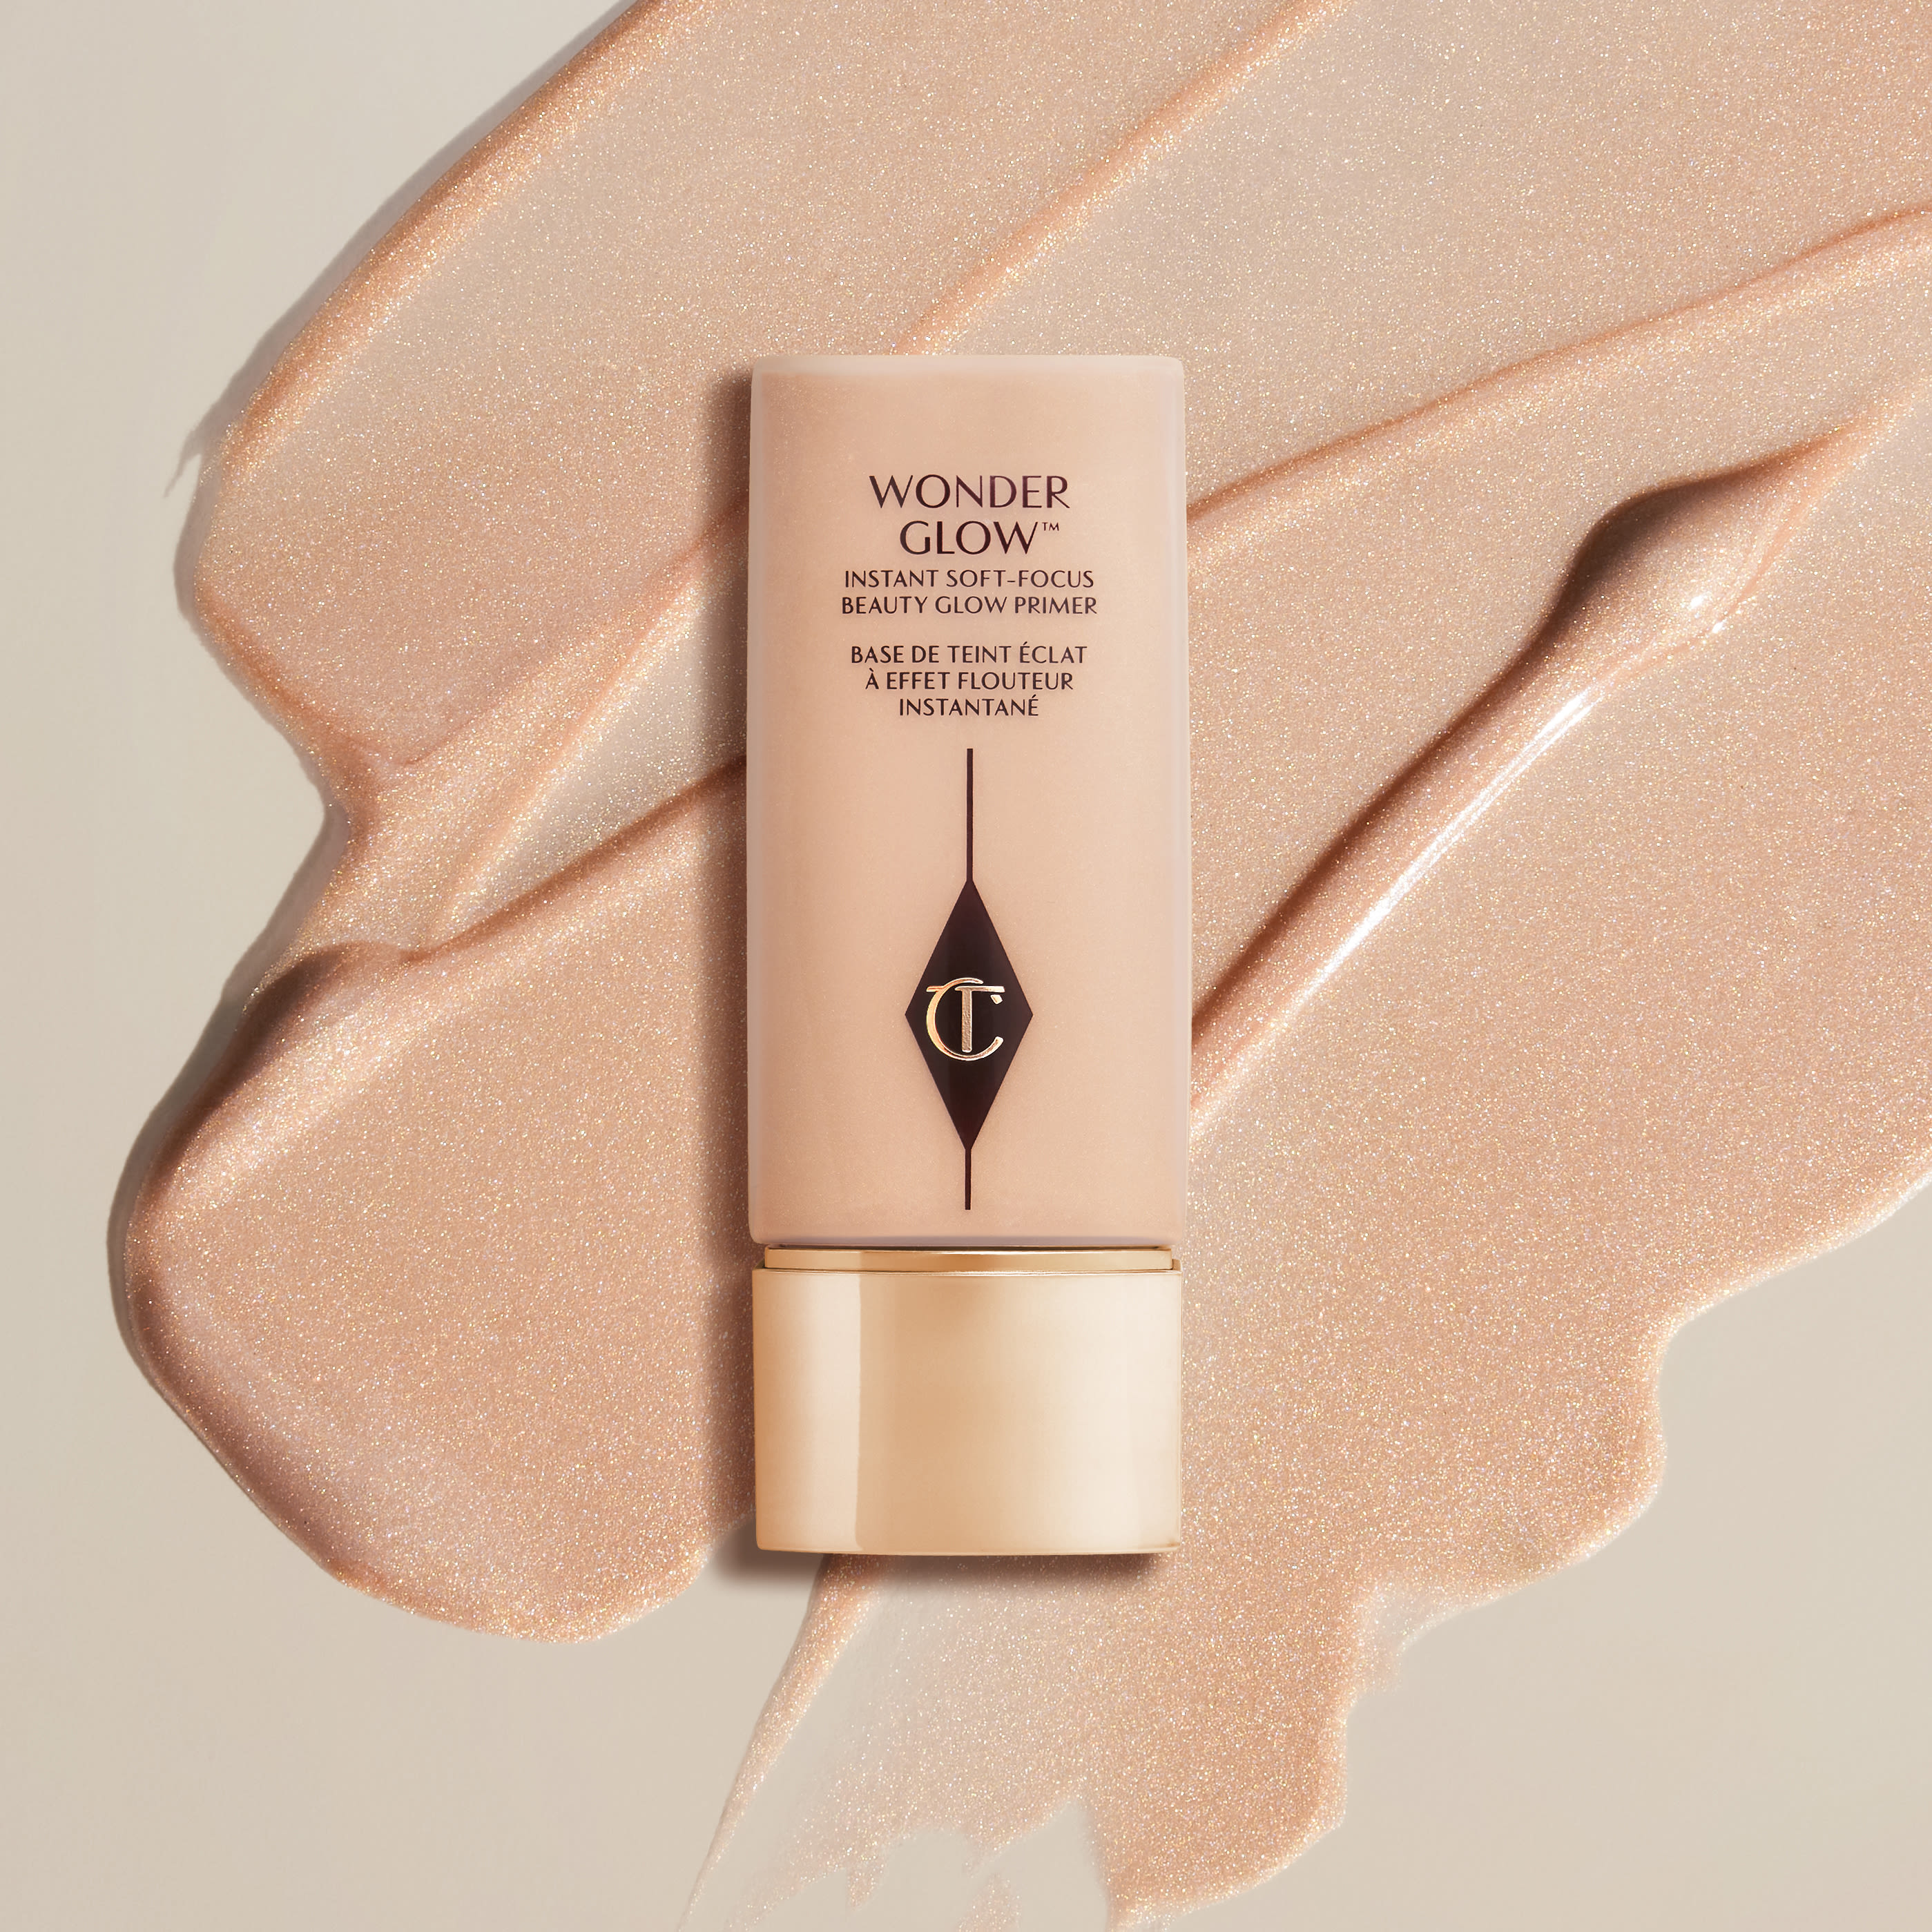 Wonderglow is Charlotte's luminous face primer that preps the skin for makeup while enhancing your glow